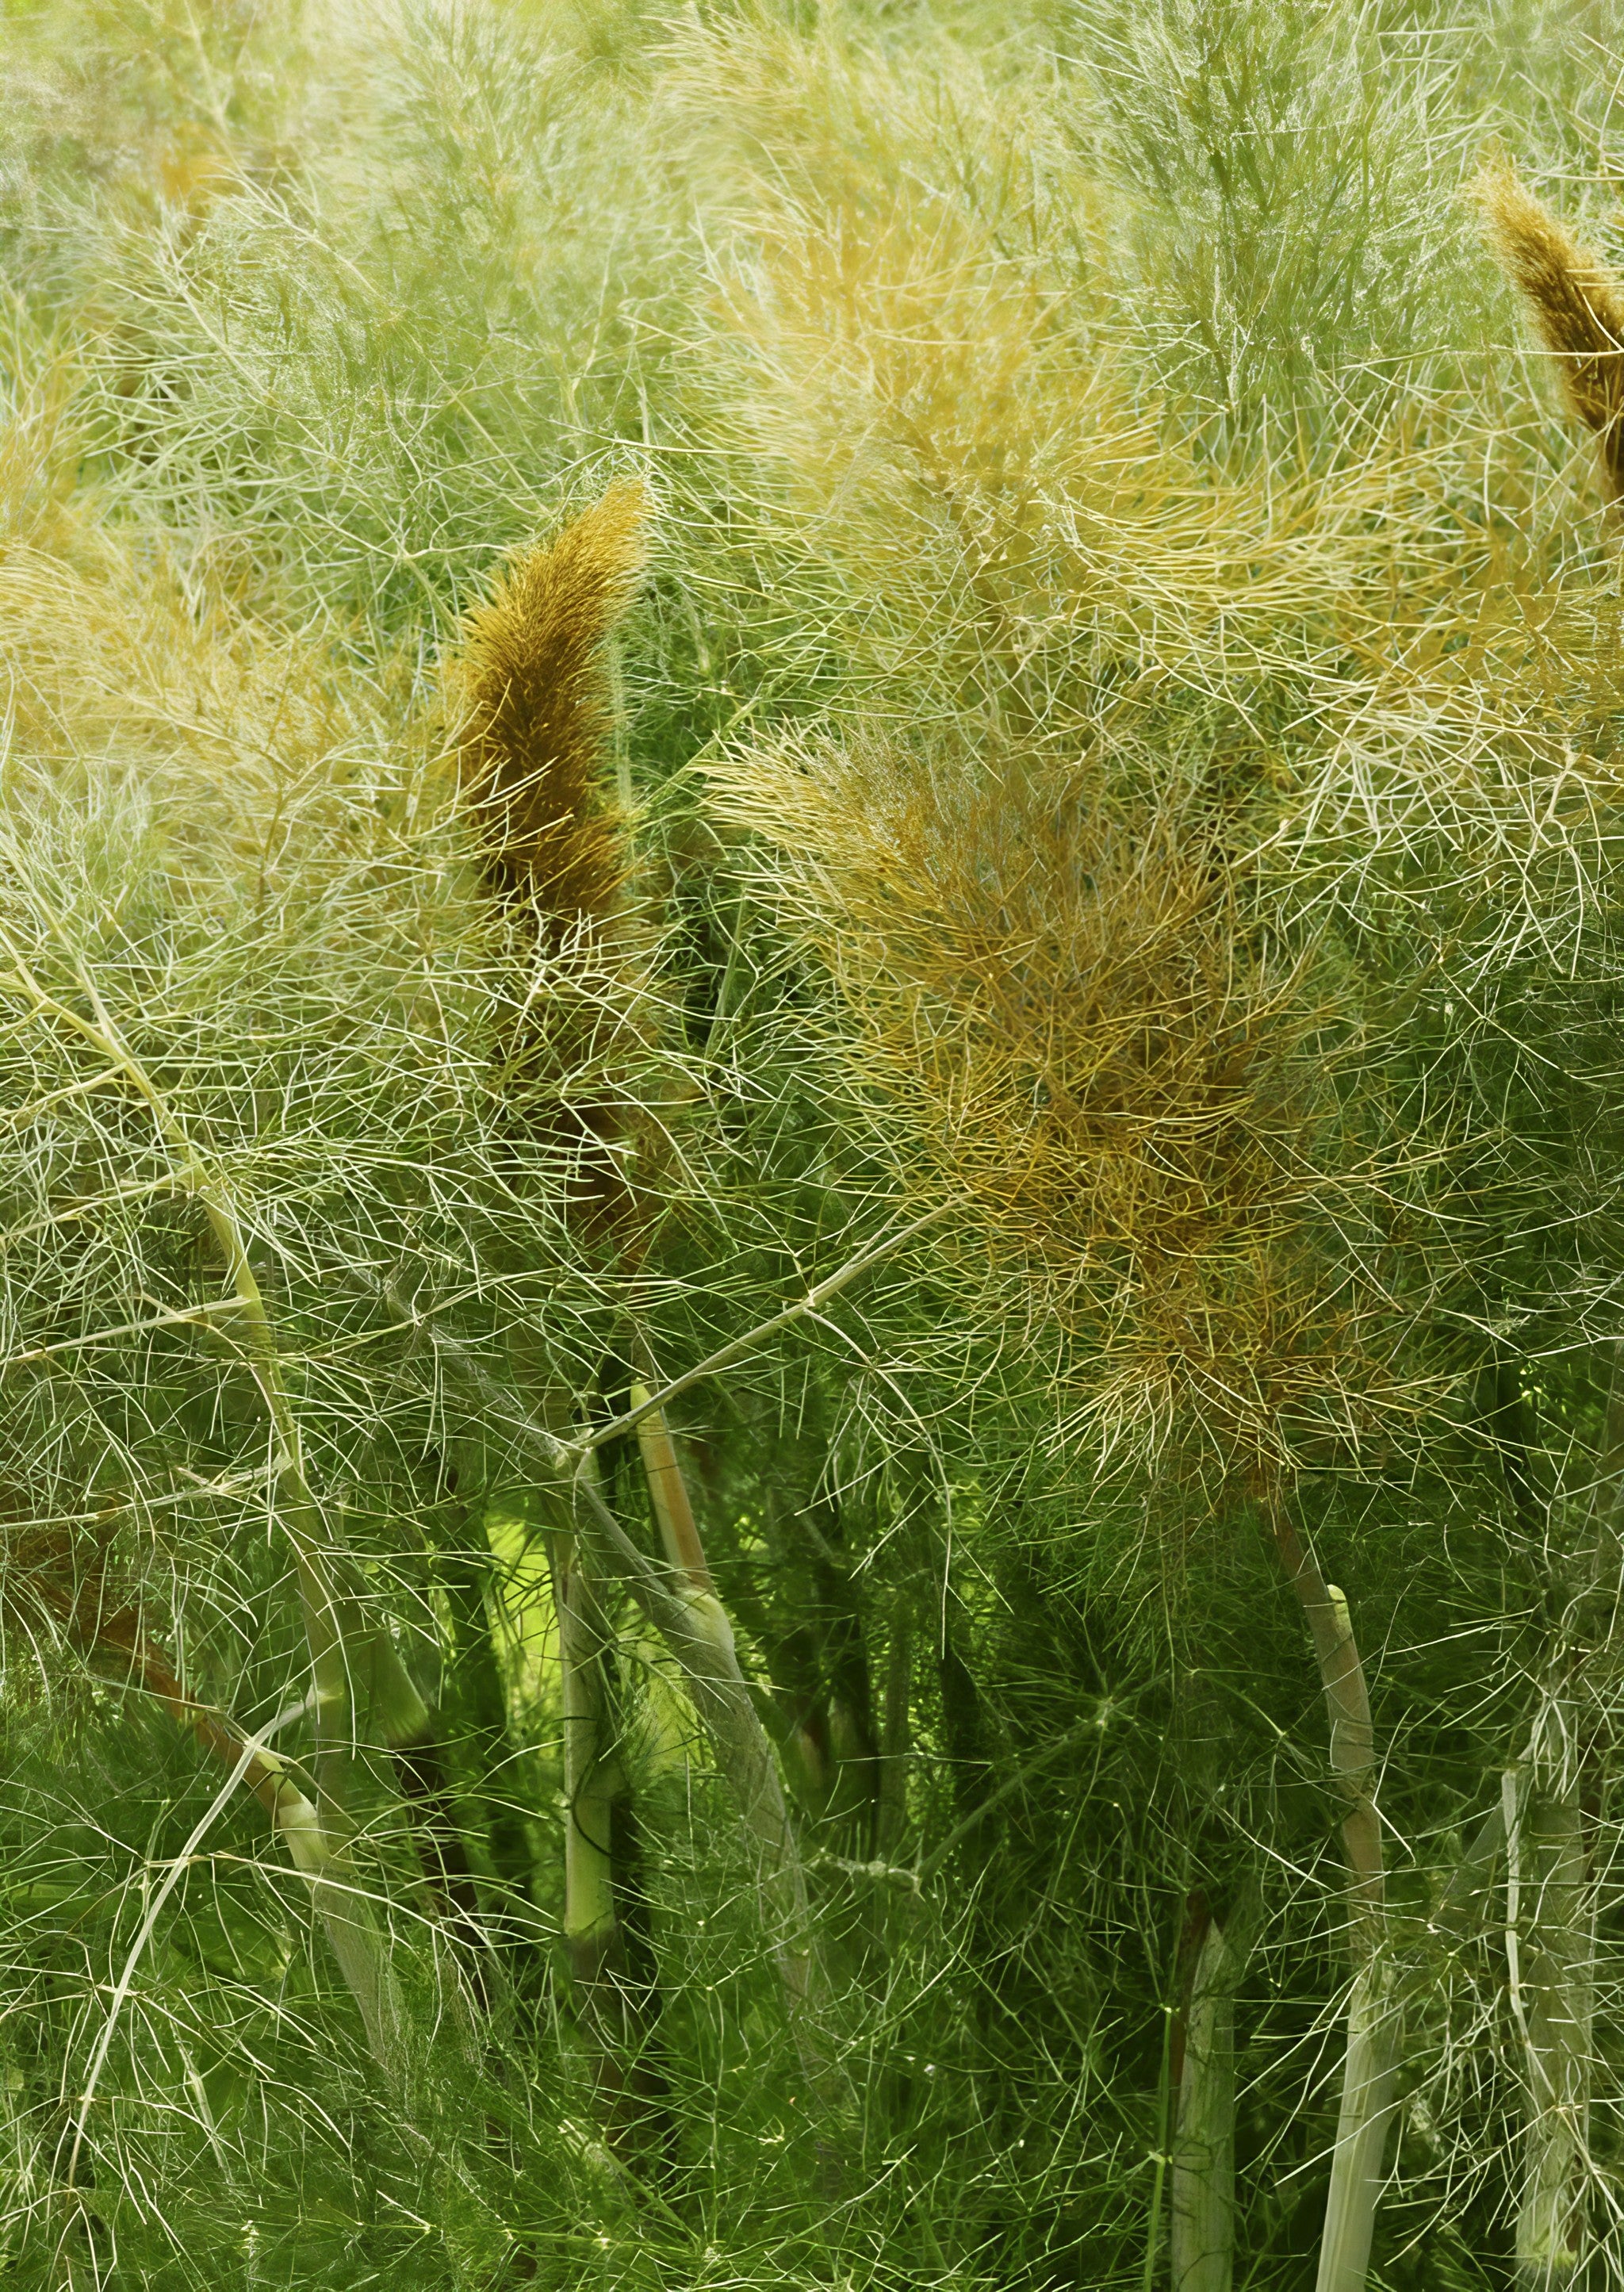 Close-up of Bronze Fennel foliage with feathery leaves